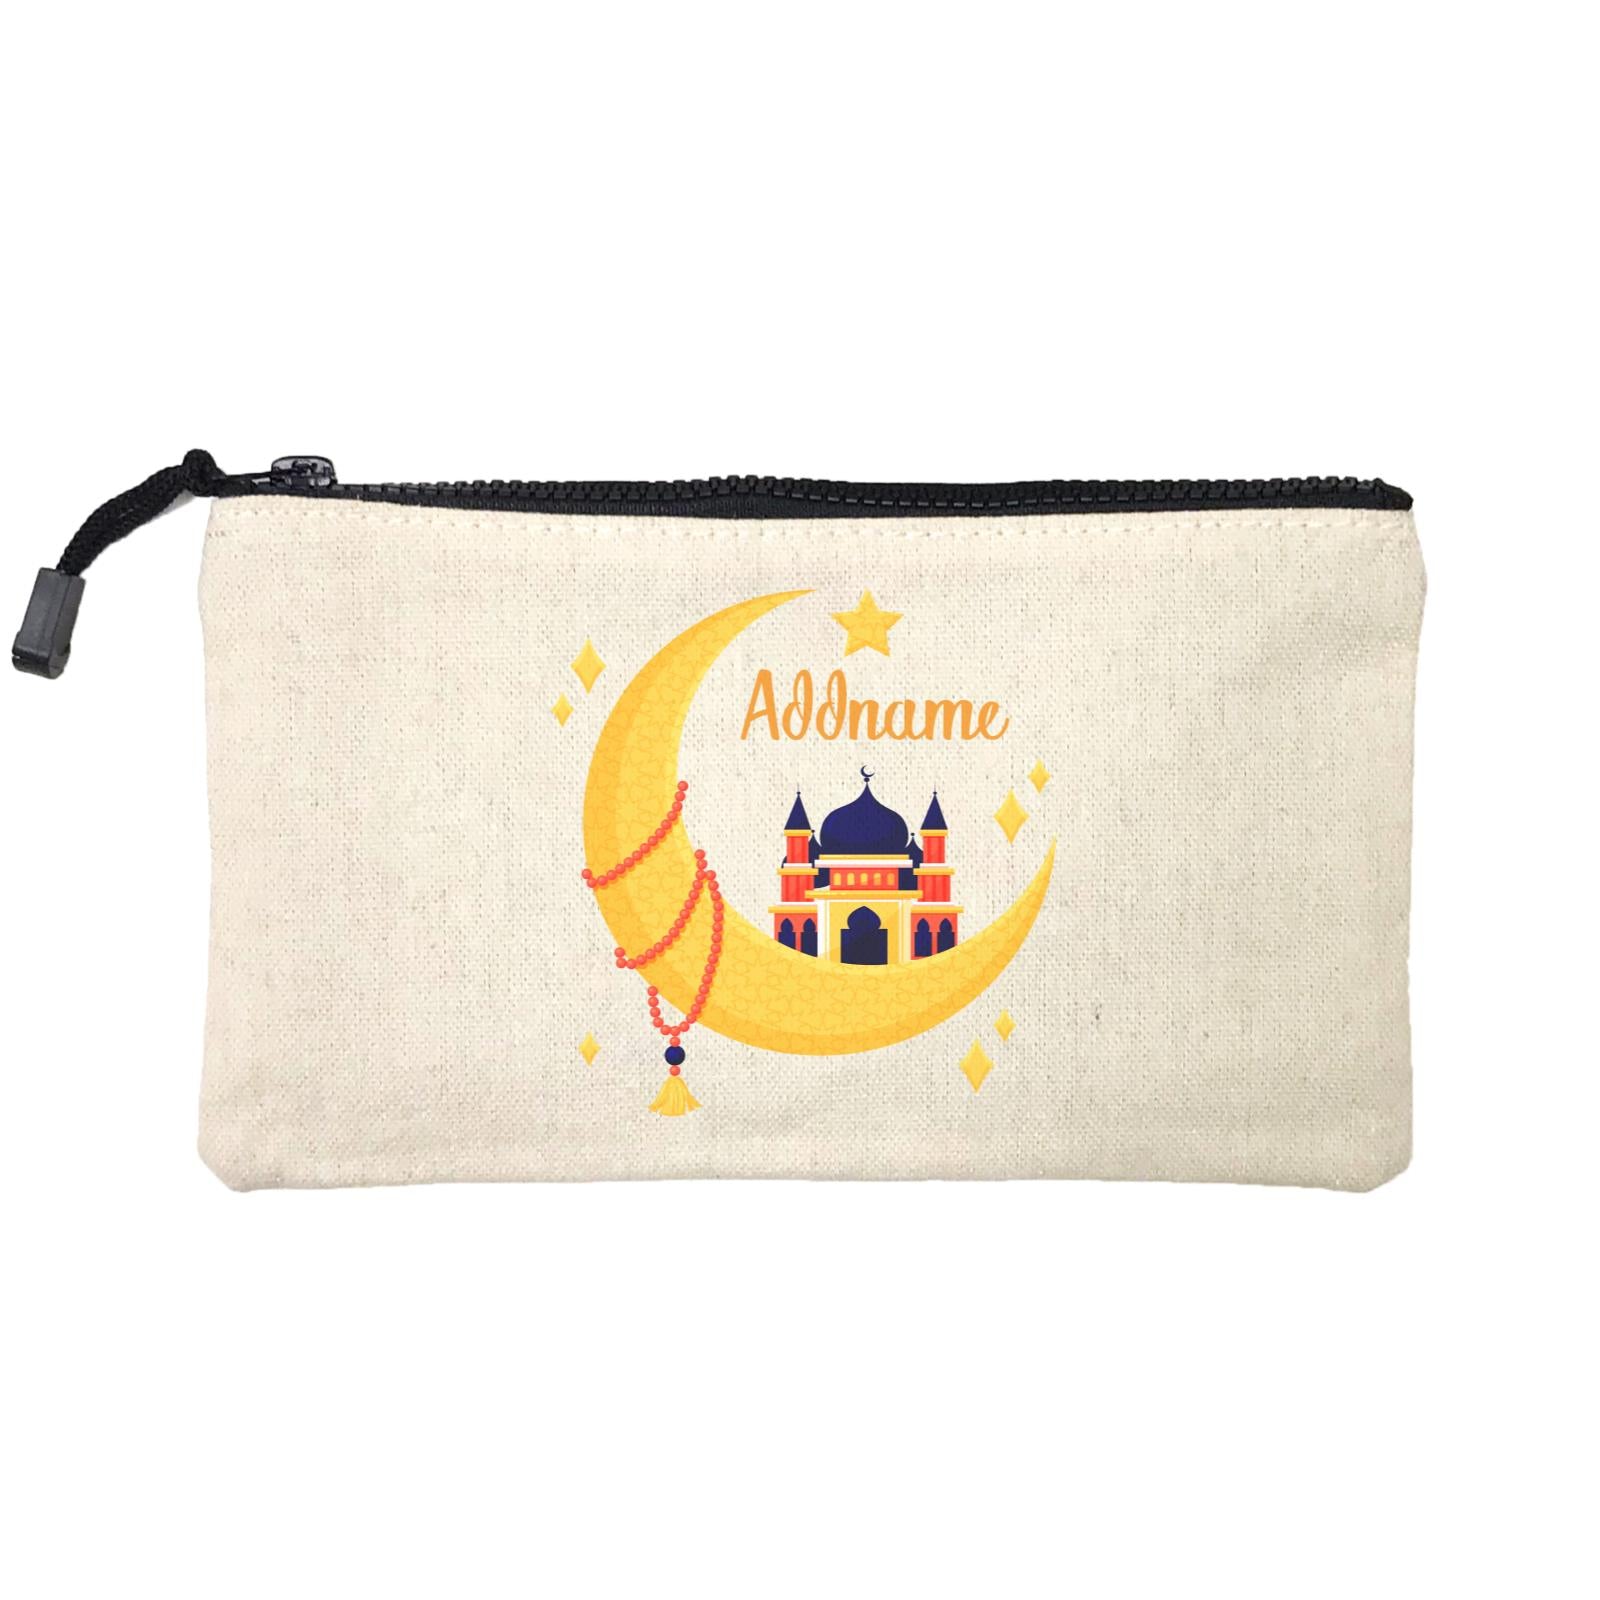 Raya Moon Islamic Moon Star And Mosque Addname Mini Accessories Stationery Pouch